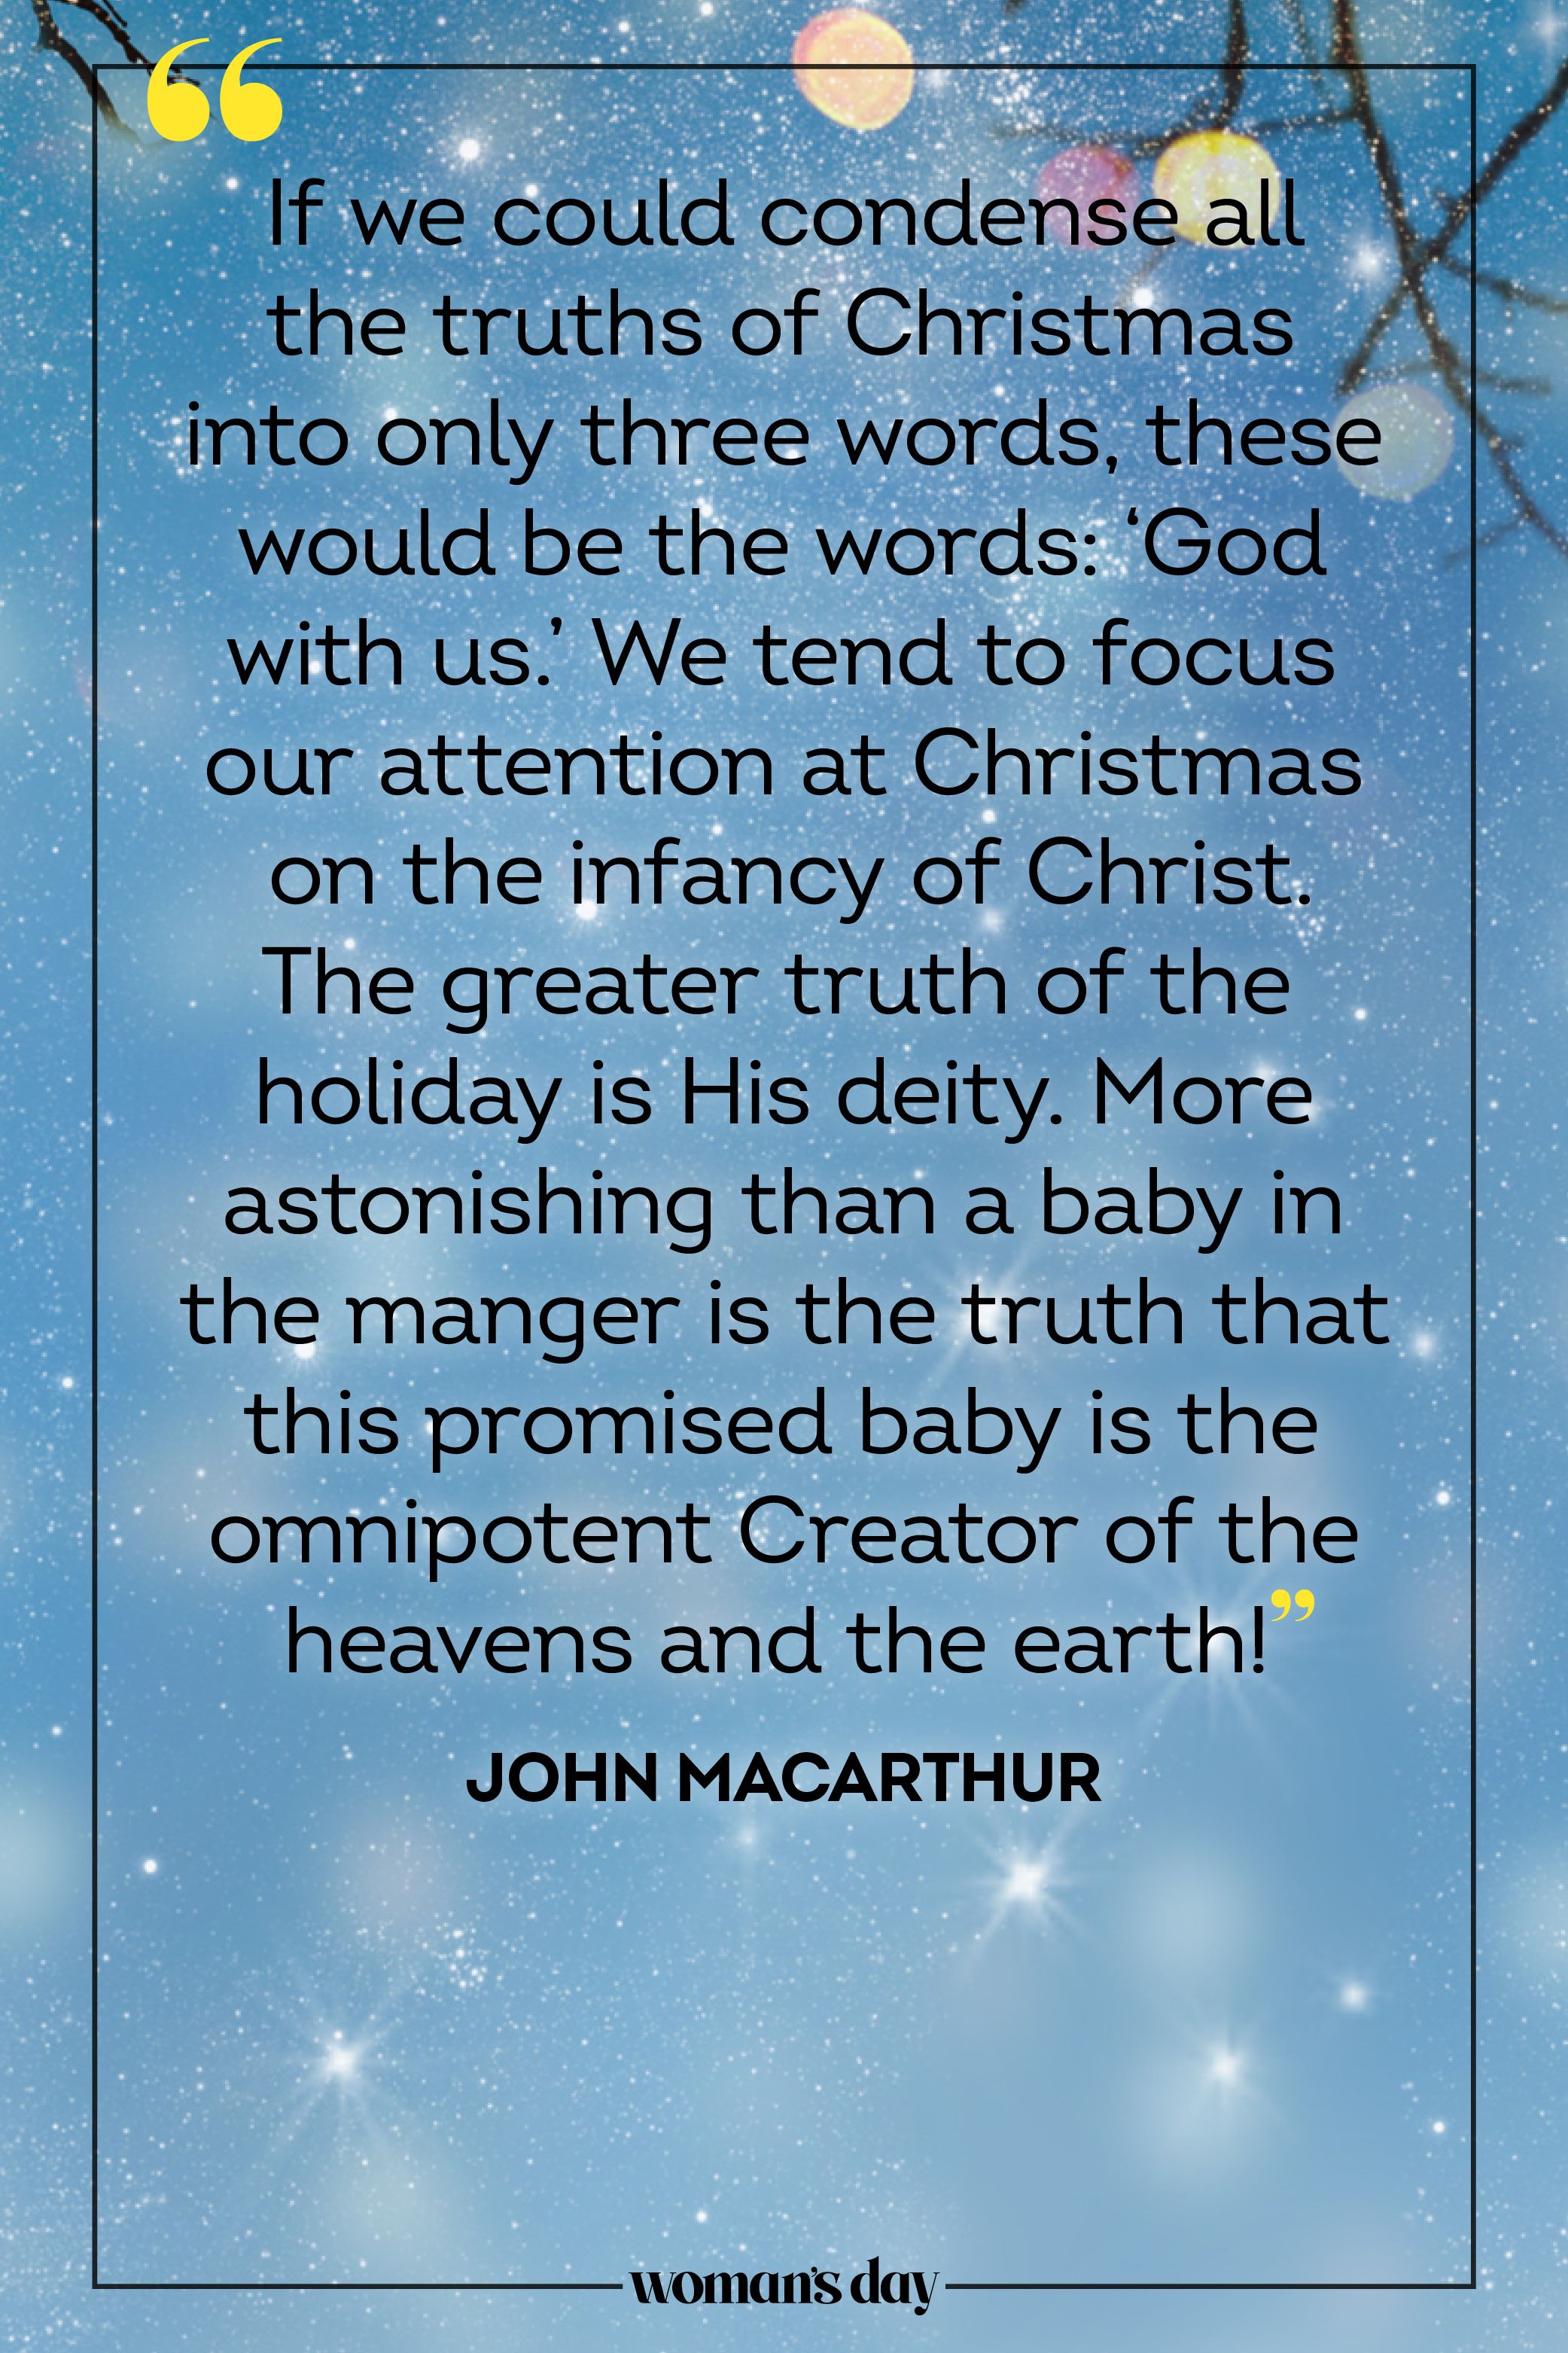 True meaning of Christmas and the joy of faith: How to reach out